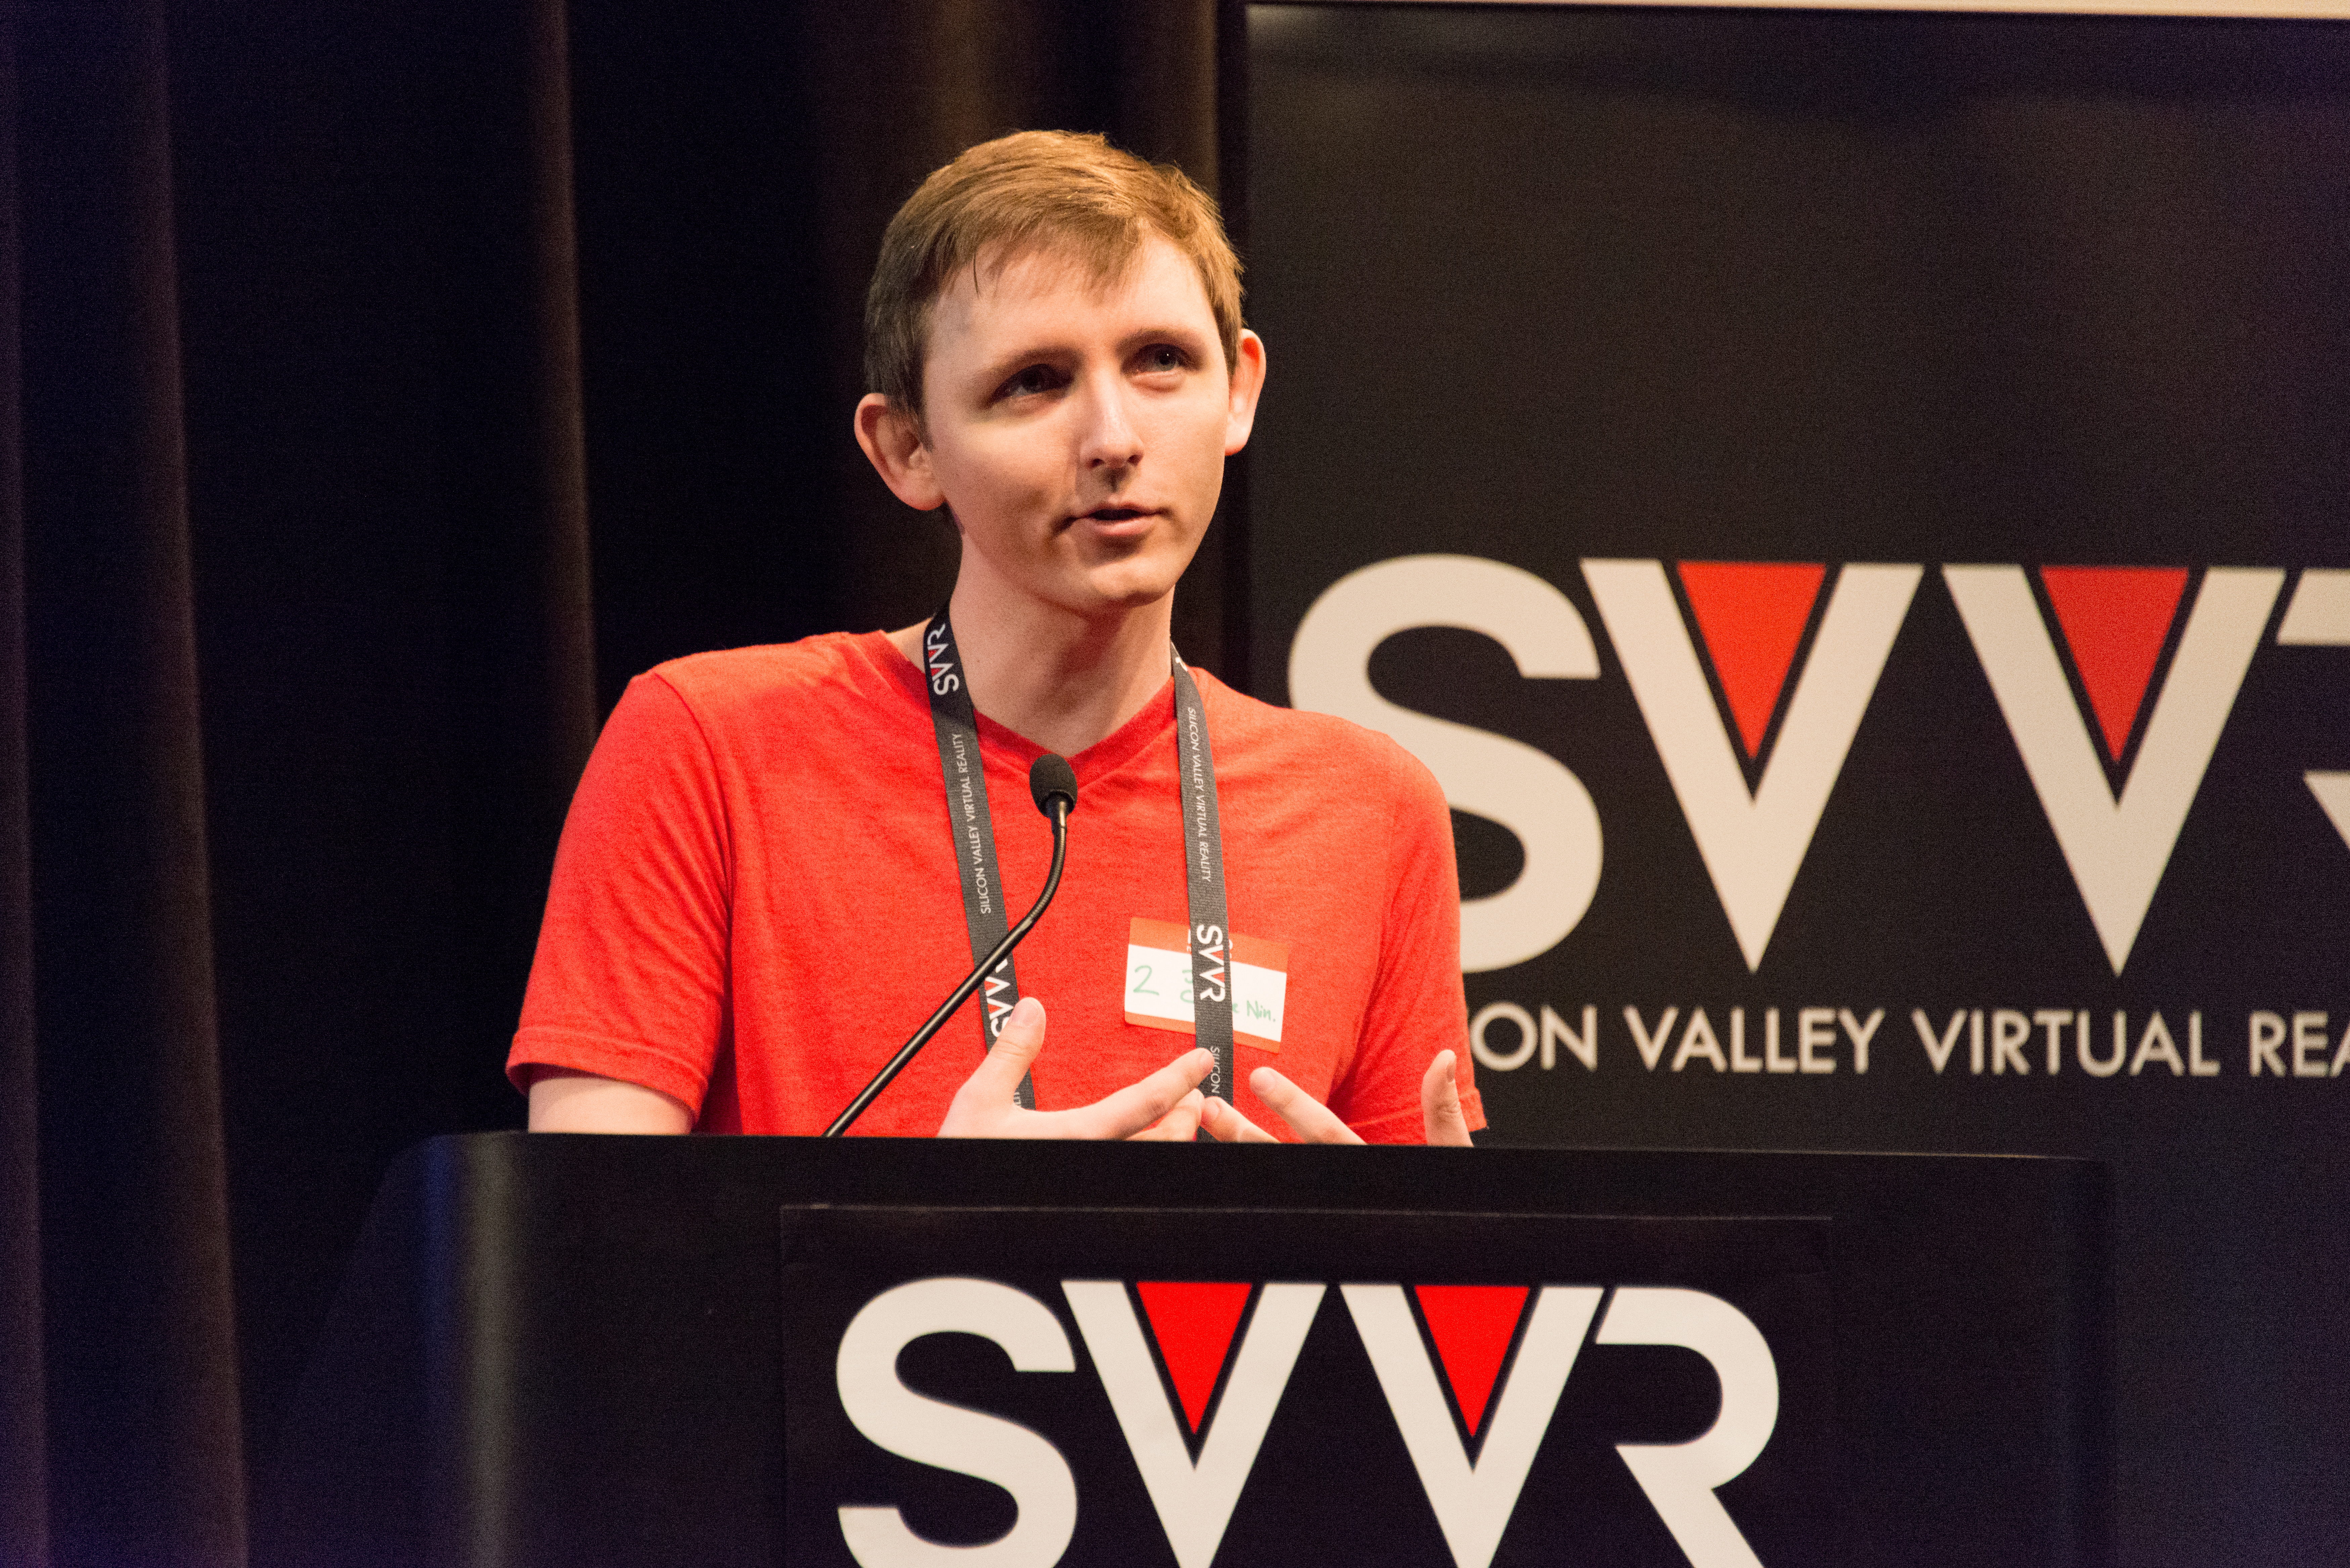 Josh farkas, ceo of cubicle ninjas, giving 60 second pitch at svvr photo